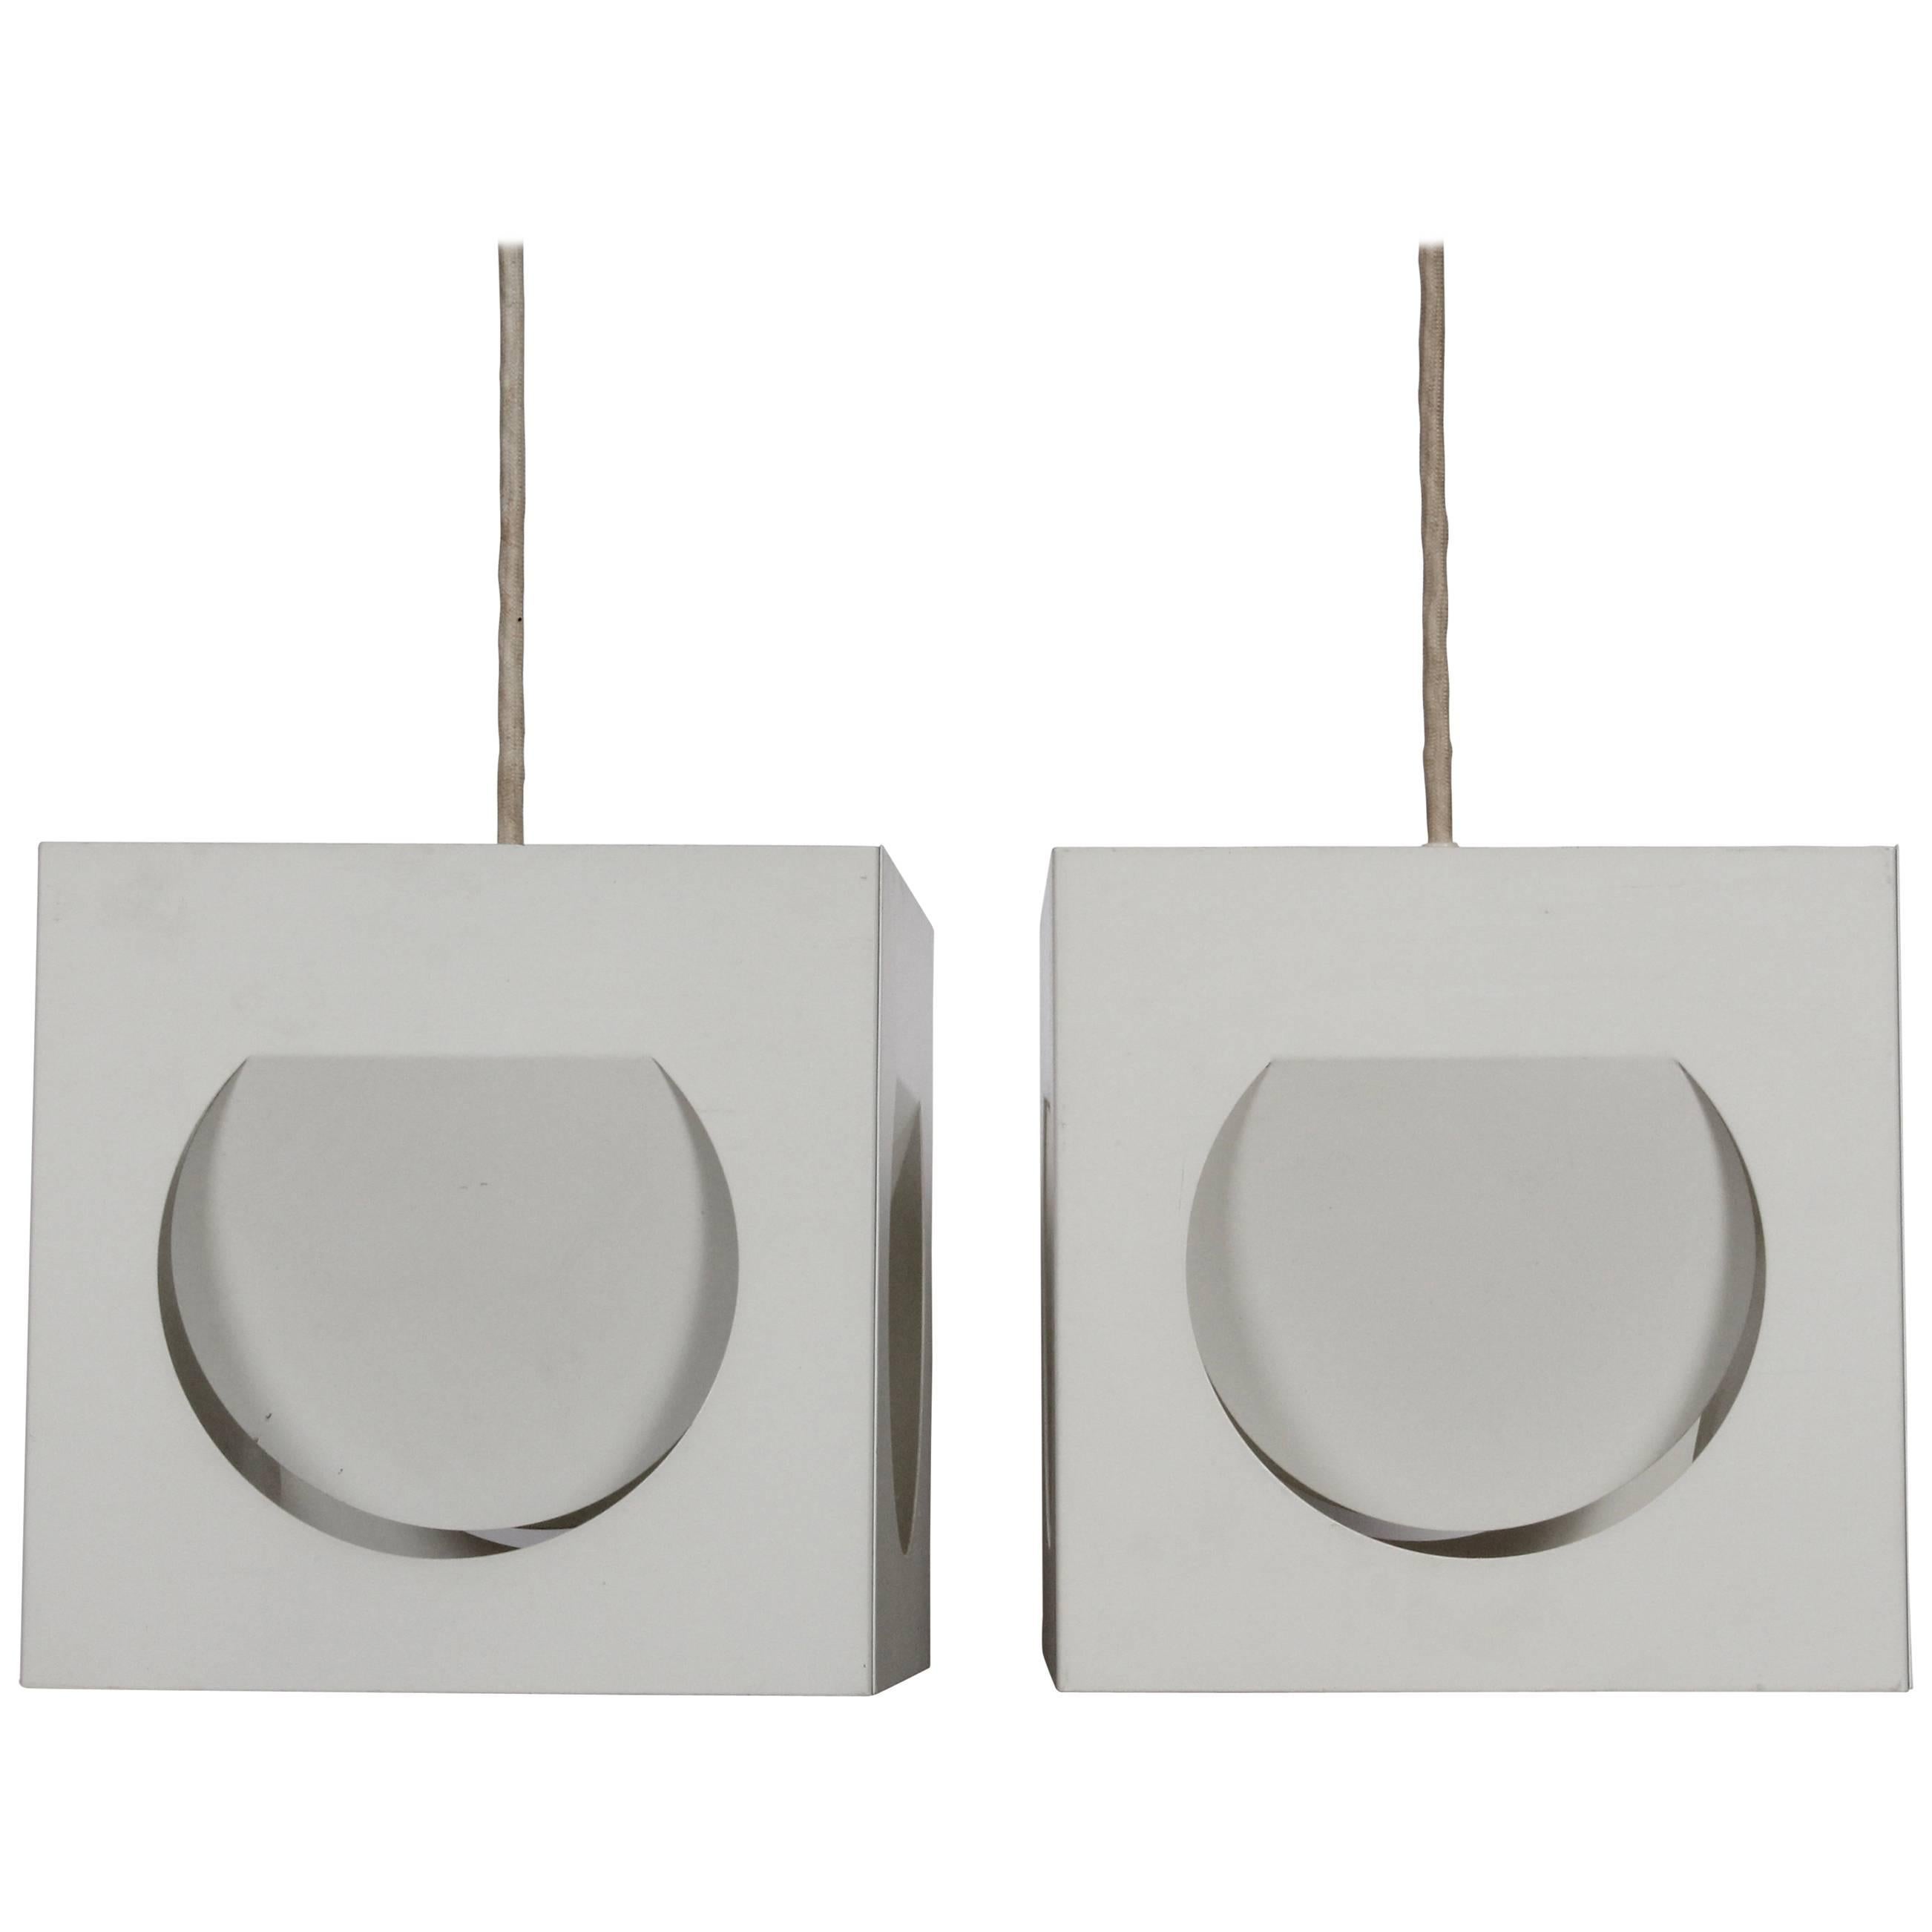 Pair of Shogo Suzuki for Stockmann Orno White Metal Cube Hanging Lamps, 1960s For Sale